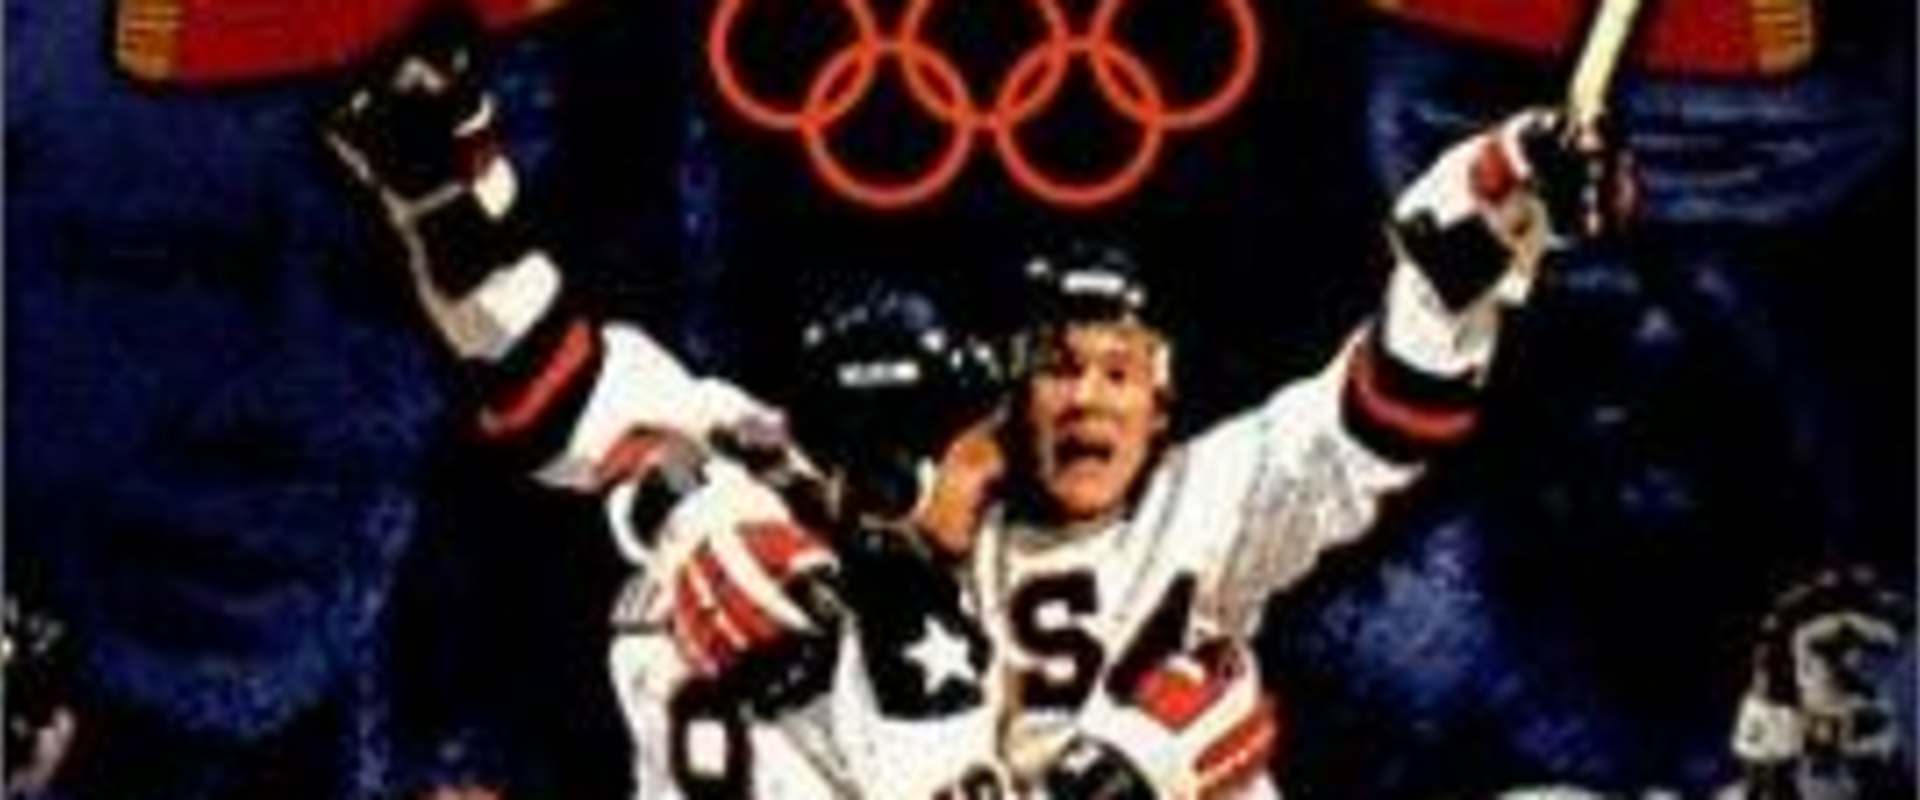 Do You Believe in Miracles? The Story of the 1980 U.S. Hockey Team background 2